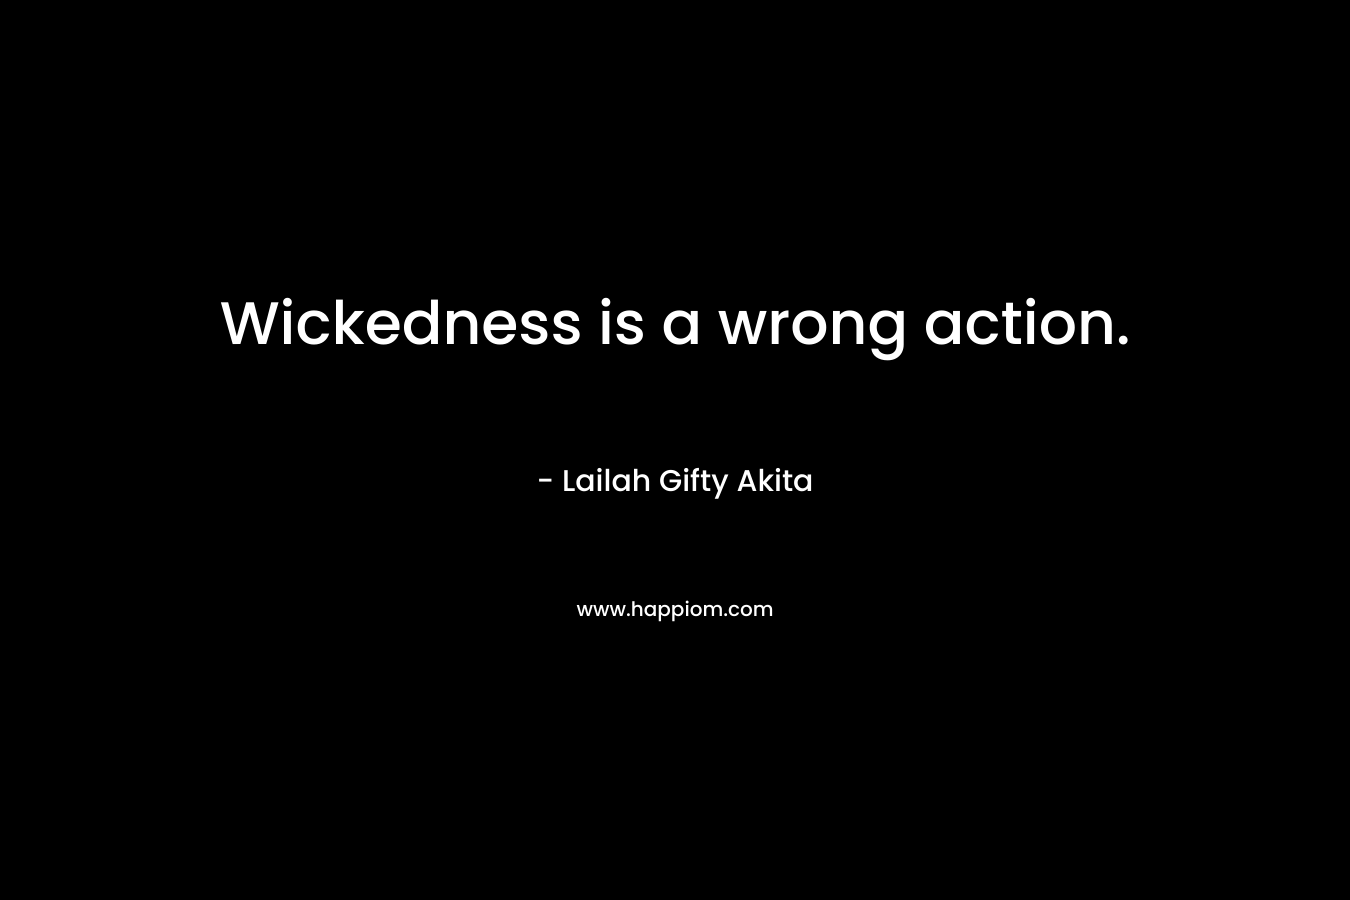 Wickedness is a wrong action.